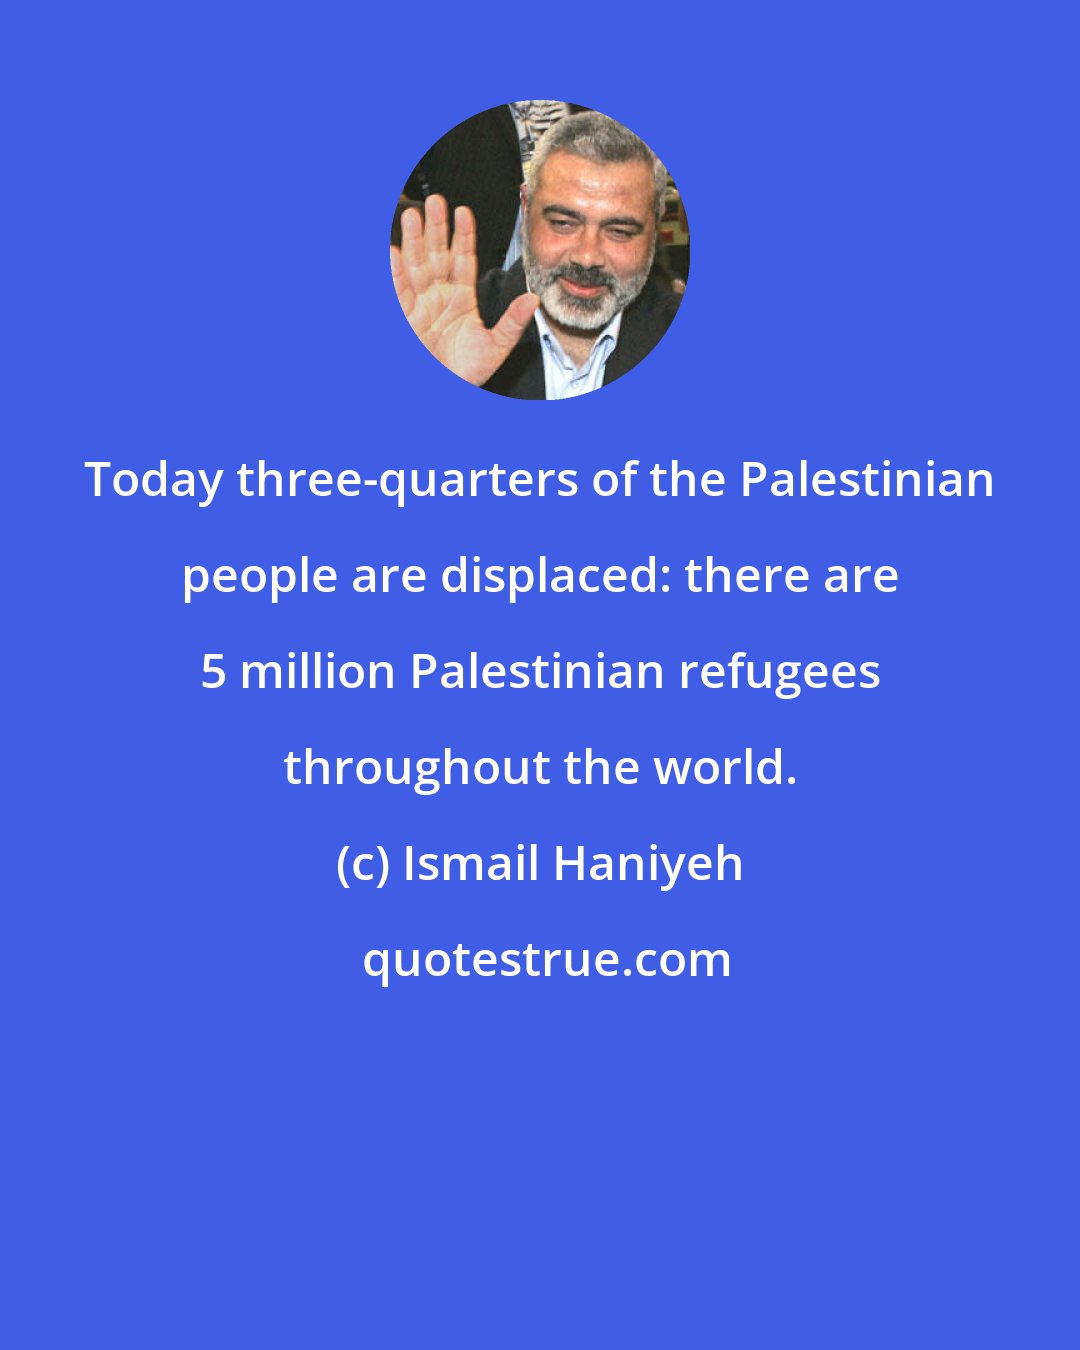 Ismail Haniyeh: Today three-quarters of the Palestinian people are displaced: there are 5 million Palestinian refugees throughout the world.